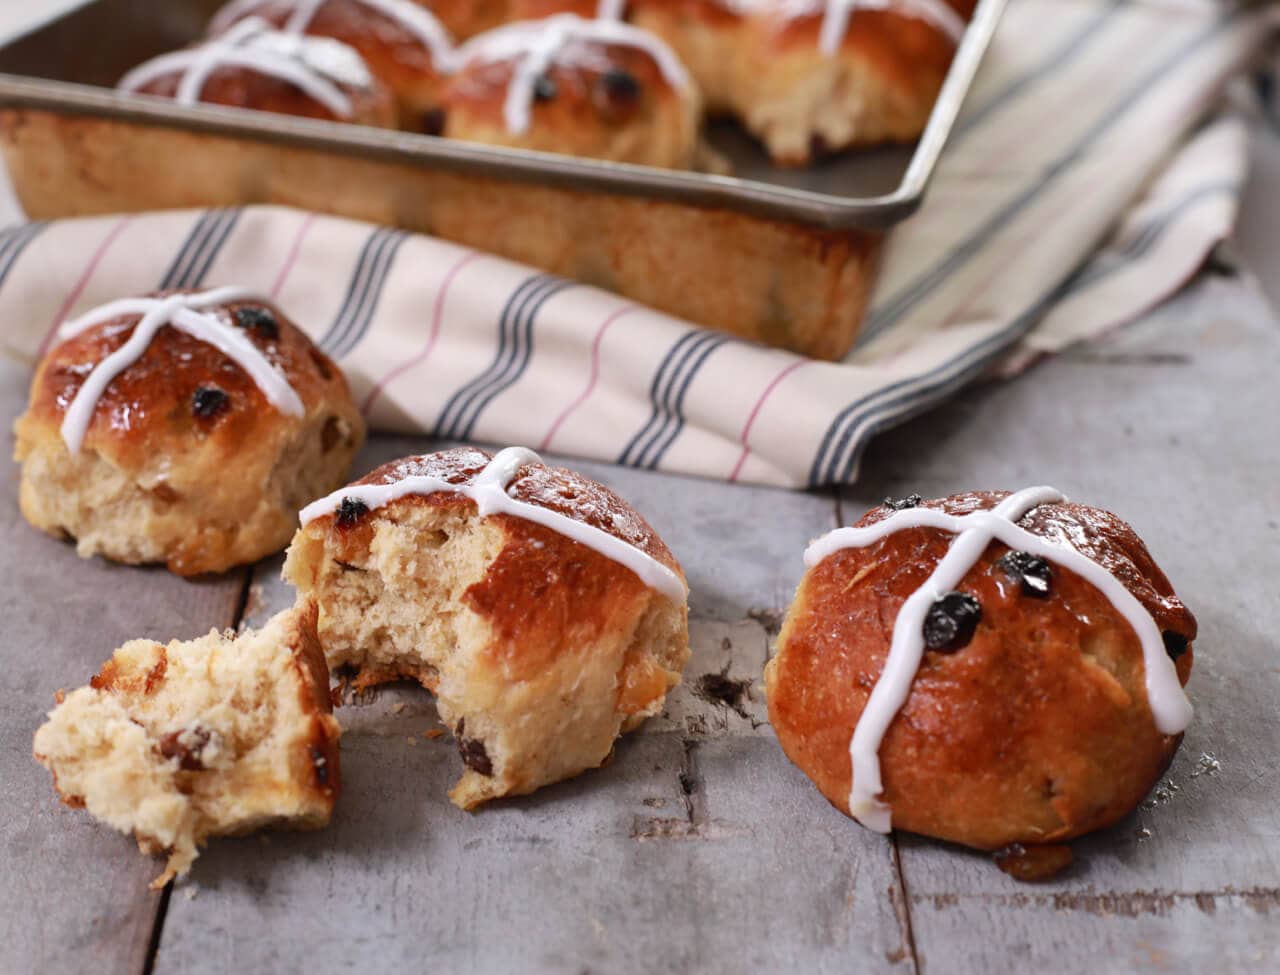 Enjoy warm Hot Cross Buns this Easter with this easy recipe